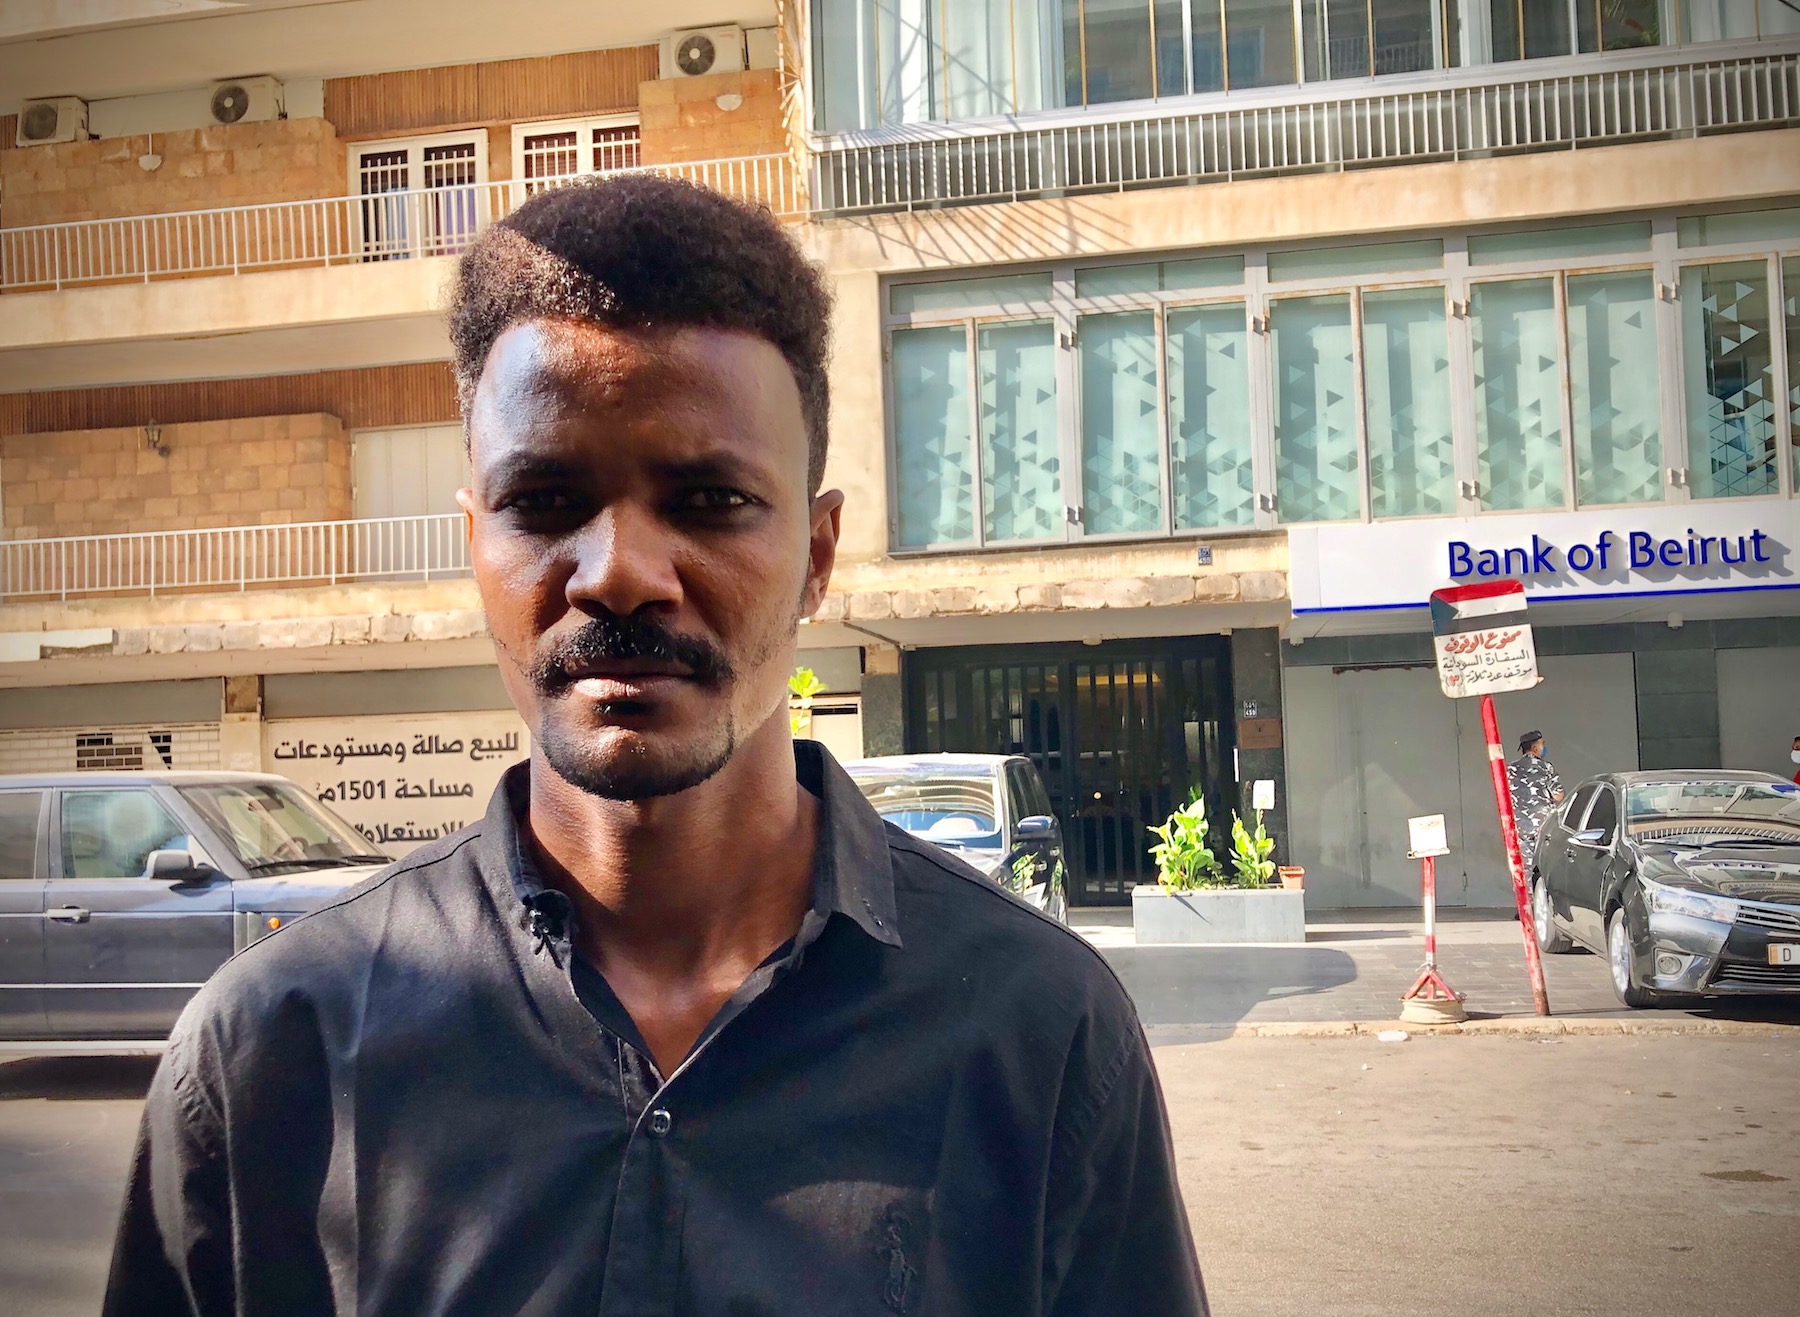 Sudanese migrant in Beirut